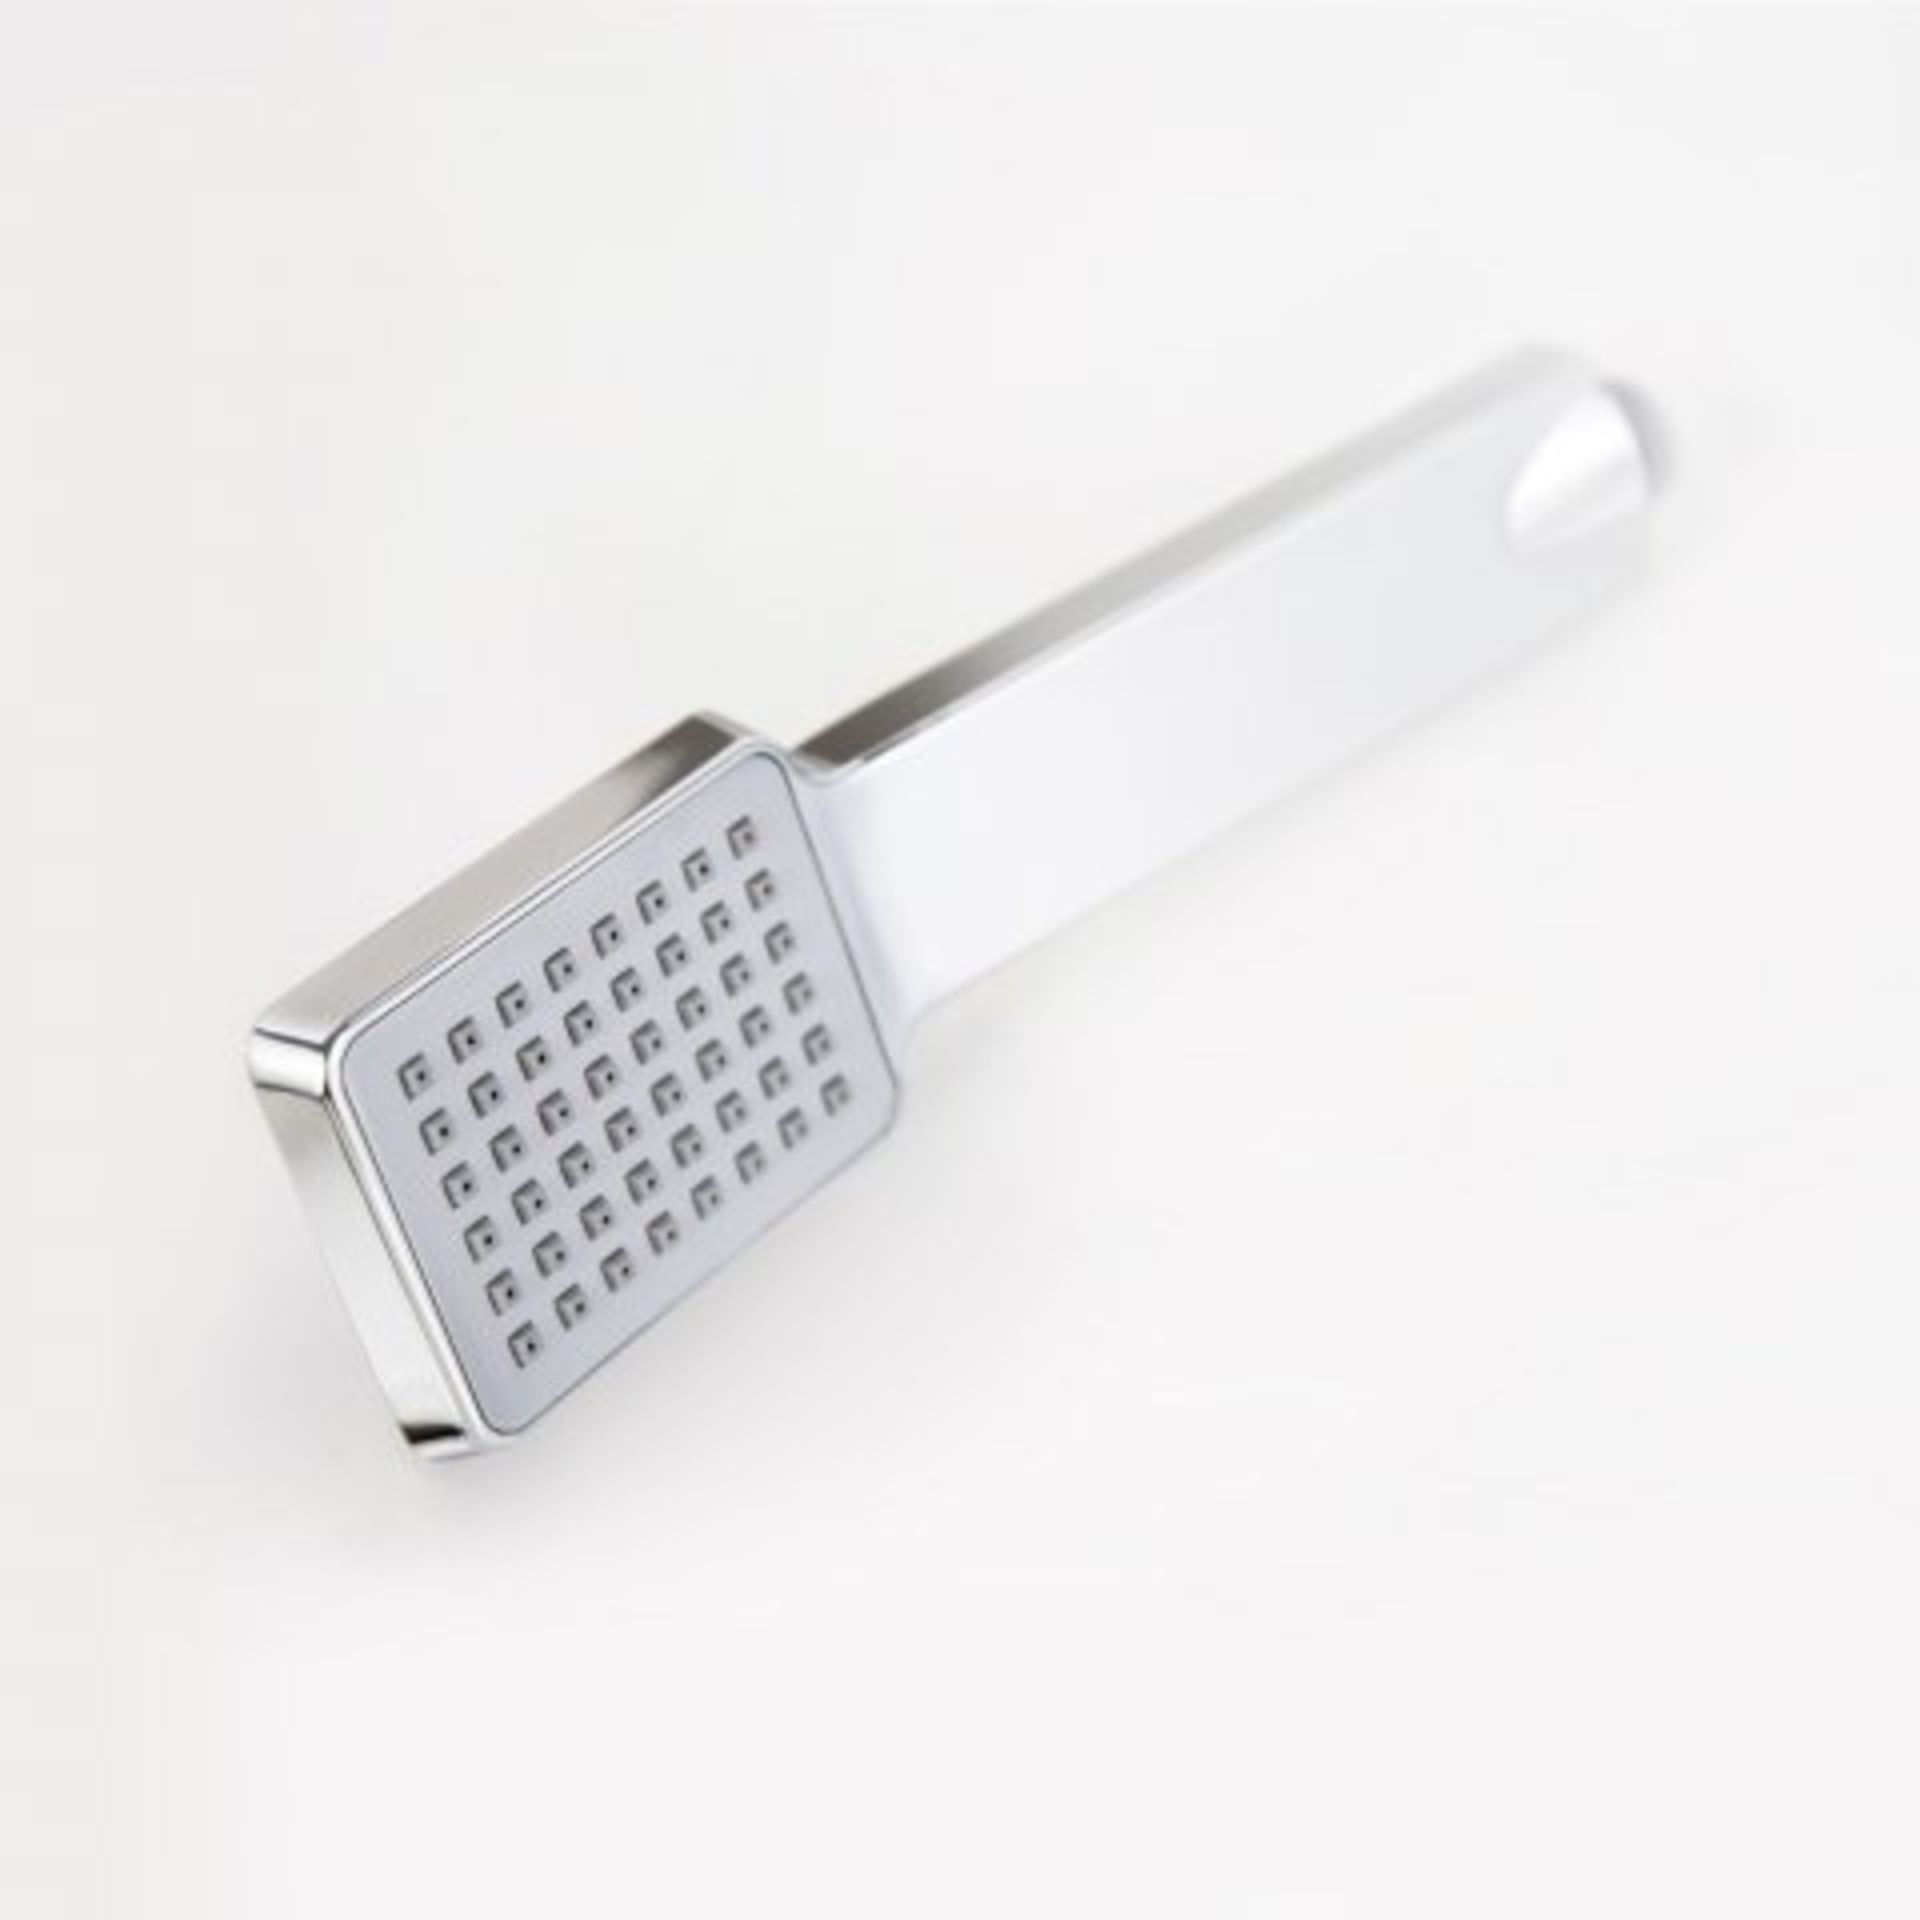 (K349) 250mm Large Square Head Thermostatic Exposed Shower Kit, Handheld & Storage Shelf. RRP £349. - Image 6 of 6